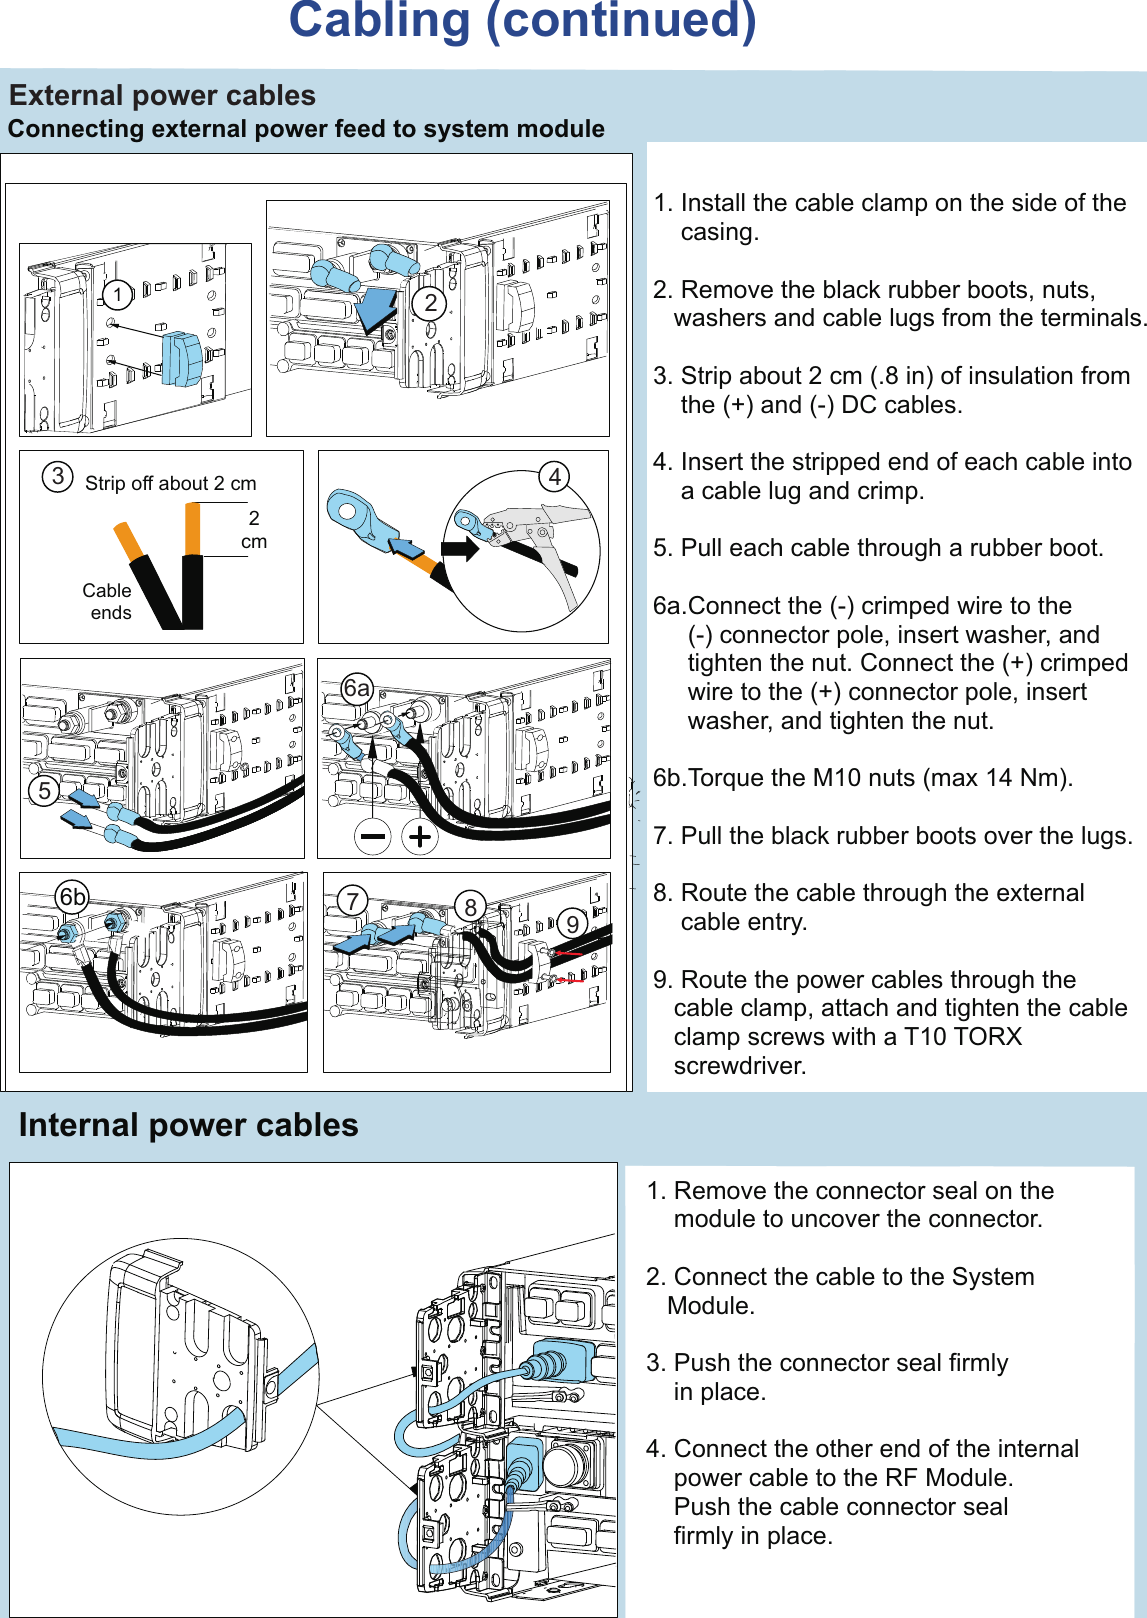 Connecting external power feed to system module1. Install the cable clamp on the side of the    casing.2. Remove the black rubber boots, nuts,    washers and cable lugs from the terminals.3. Strip about 2 cm (.8 in) of insulation from     the (+) and (-) DC cables.4. Insert the stripped end of each cable into    a cable lug and crimp.5. Pull each cable through a rubber boot.6a.Connect the (-) crimped wire to the      (-) connector pole, insert washer, and     tighten the nut. Connect the (+) crimped     wire to the (+) connector pole, insert     washer, and tighten the nut. 6b.Torque the M10 nuts (max 14 Nm).7. Pull the black rubber boots over the lugs.8. Route the cable through the external    cable entry.9. Route the power cables through the    cable clamp, attach and tighten the cable    clamp screws with a T10 TORX   screwdriver.Cabling (continued)External power cables12cm CableendsStrip off about 2 cm34256a7896bInternal power cables1. Remove the connector seal on the     module to uncover the connector.2. Connect the cable to the System   Module.3. Push the connector seal firmly    in place.4. Connect the other end of the internal     power cable to the RF Module.     Push the cable connector seal     firmly in place.